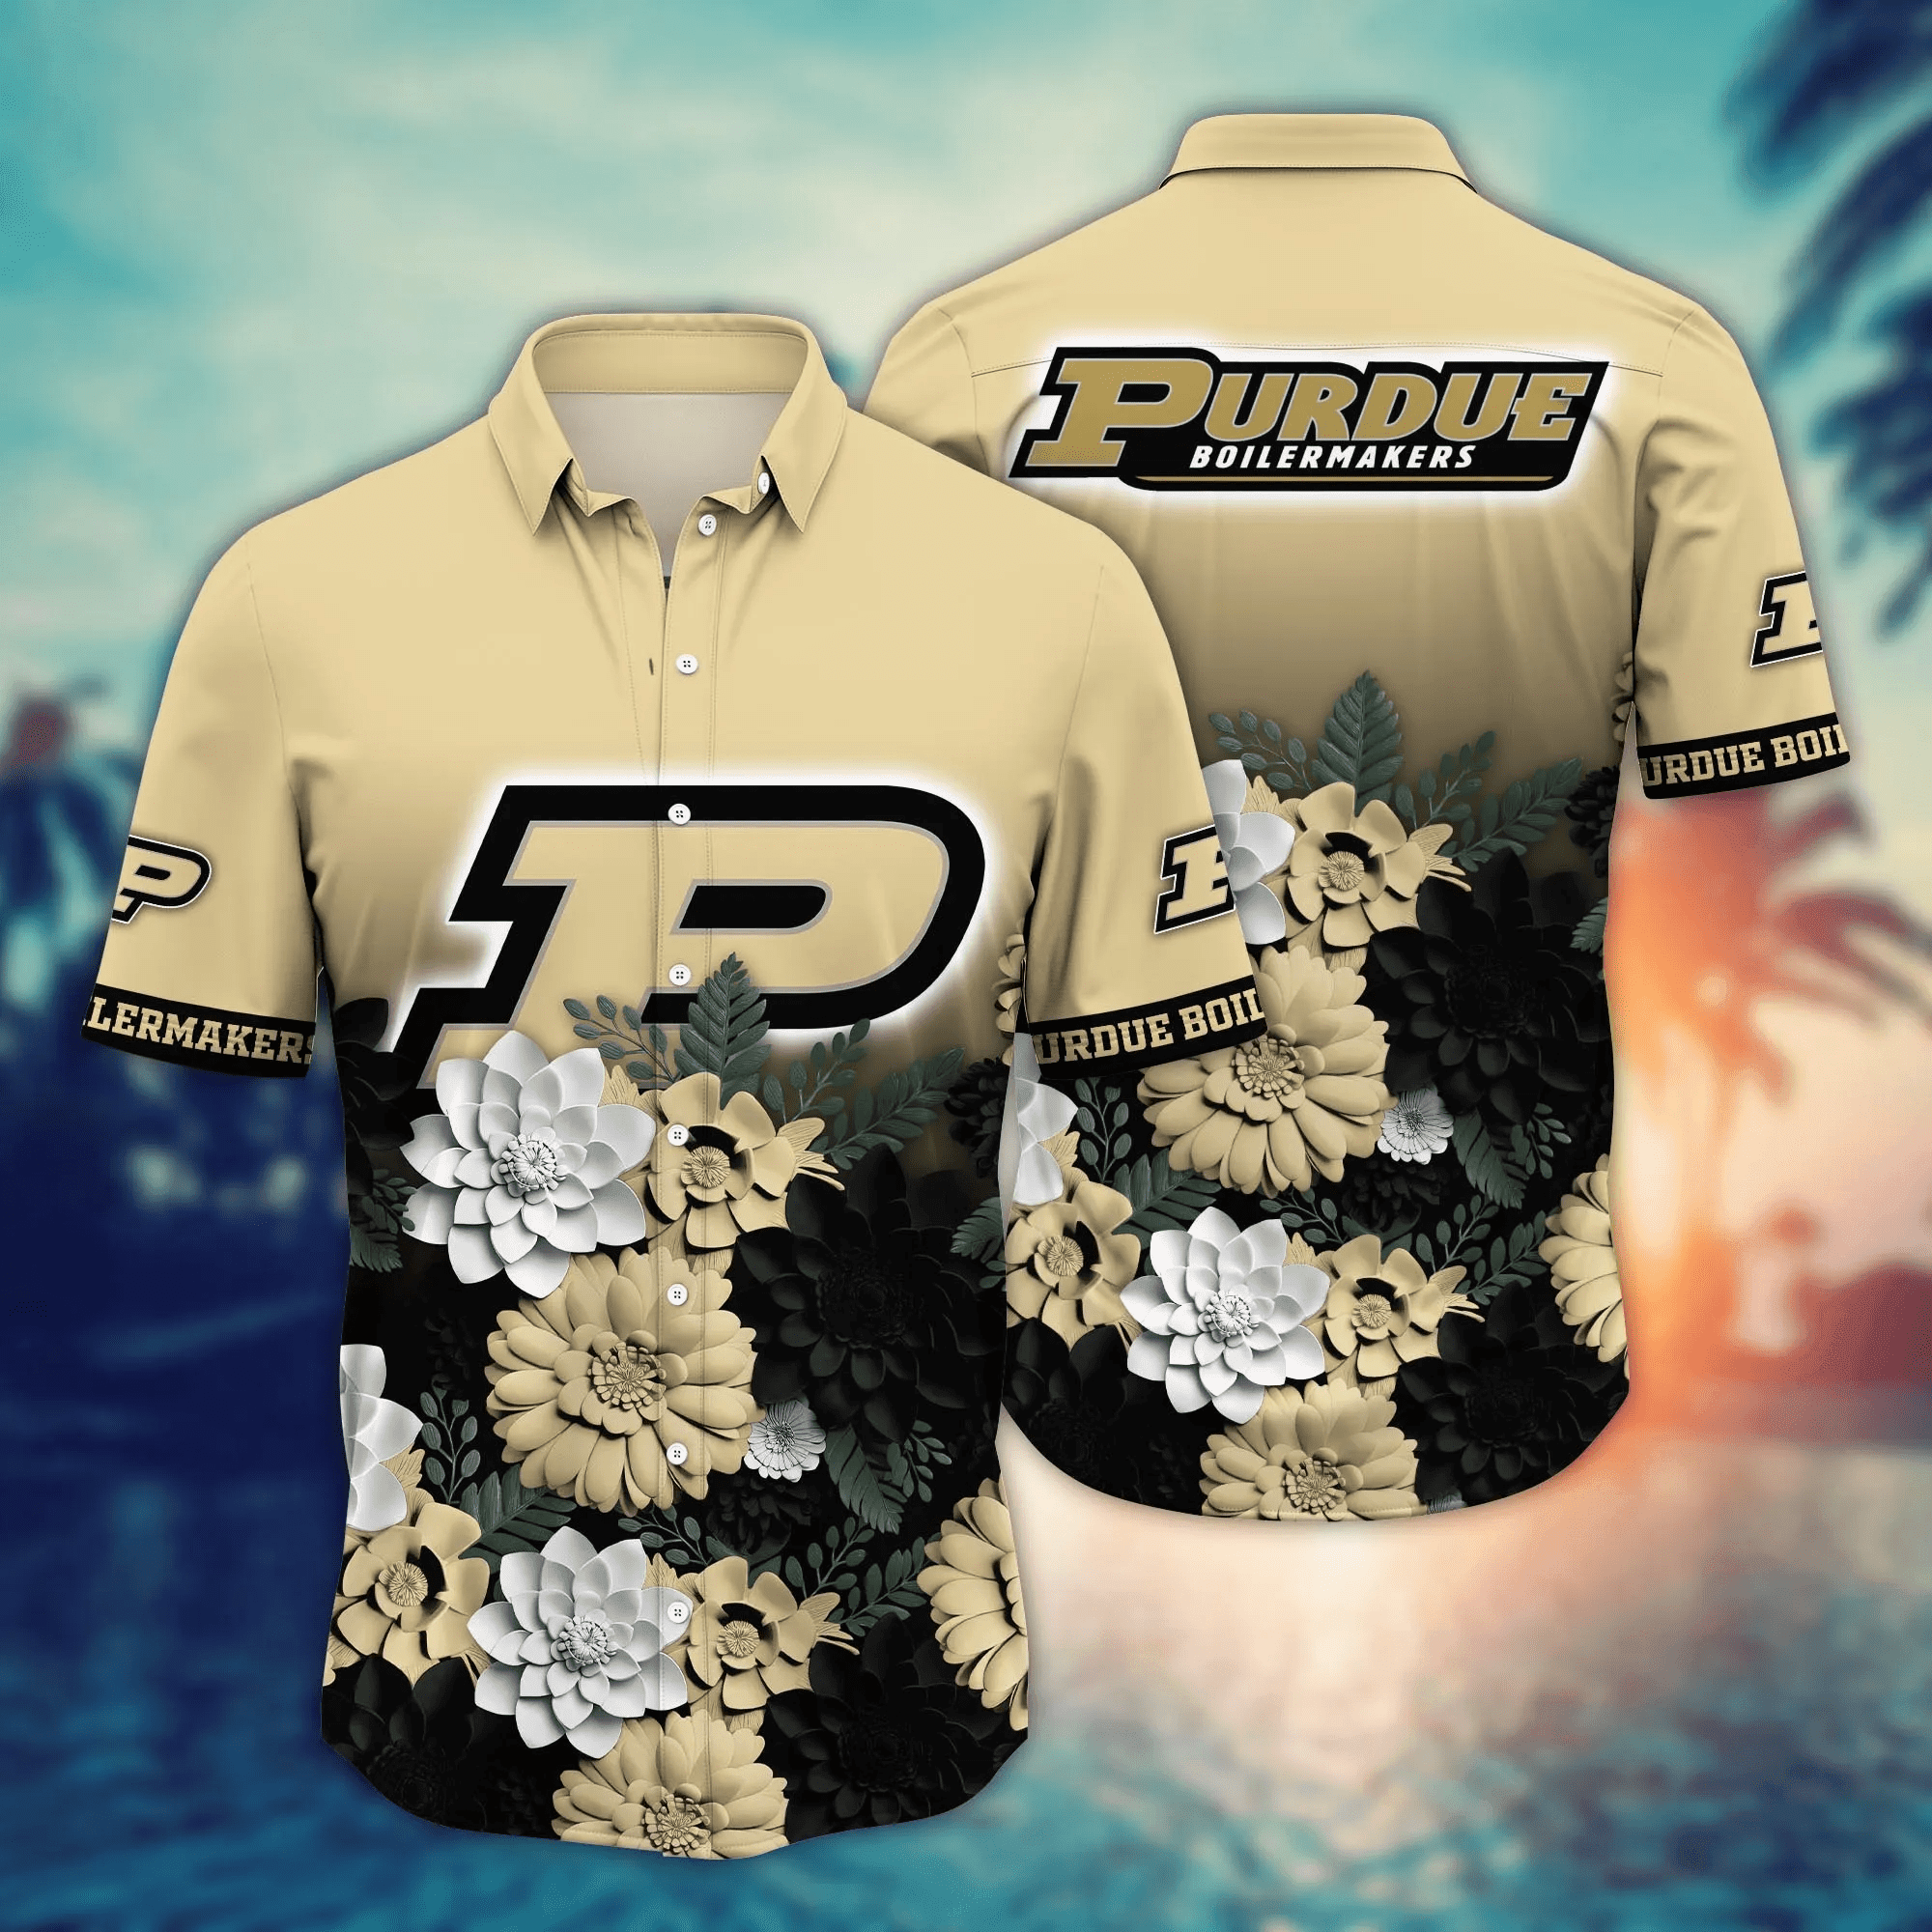 Purdue Boilermakers Flower Hawaii Shirt And T Shirt For Fans, Summer Football Shirts